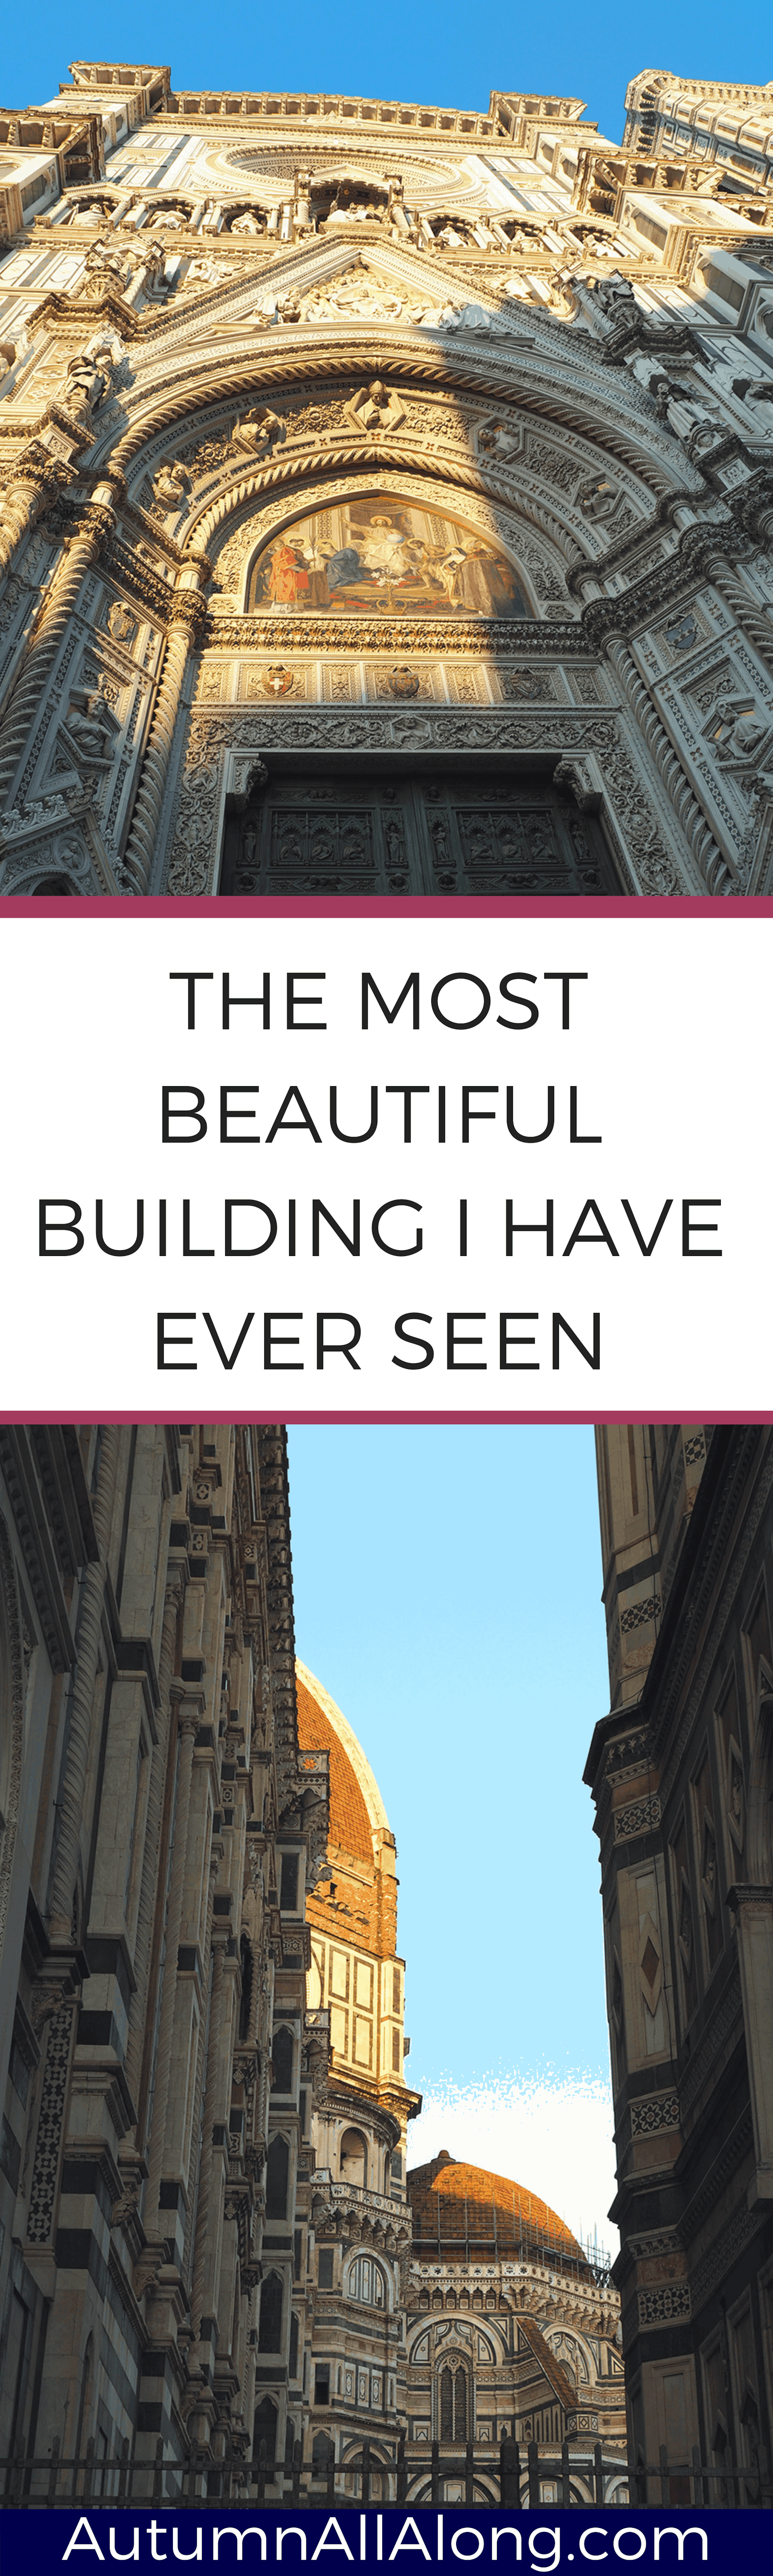 5 things to see in Florence, Italy + the most beautiful building I have ever seen. | via Autumn All Along